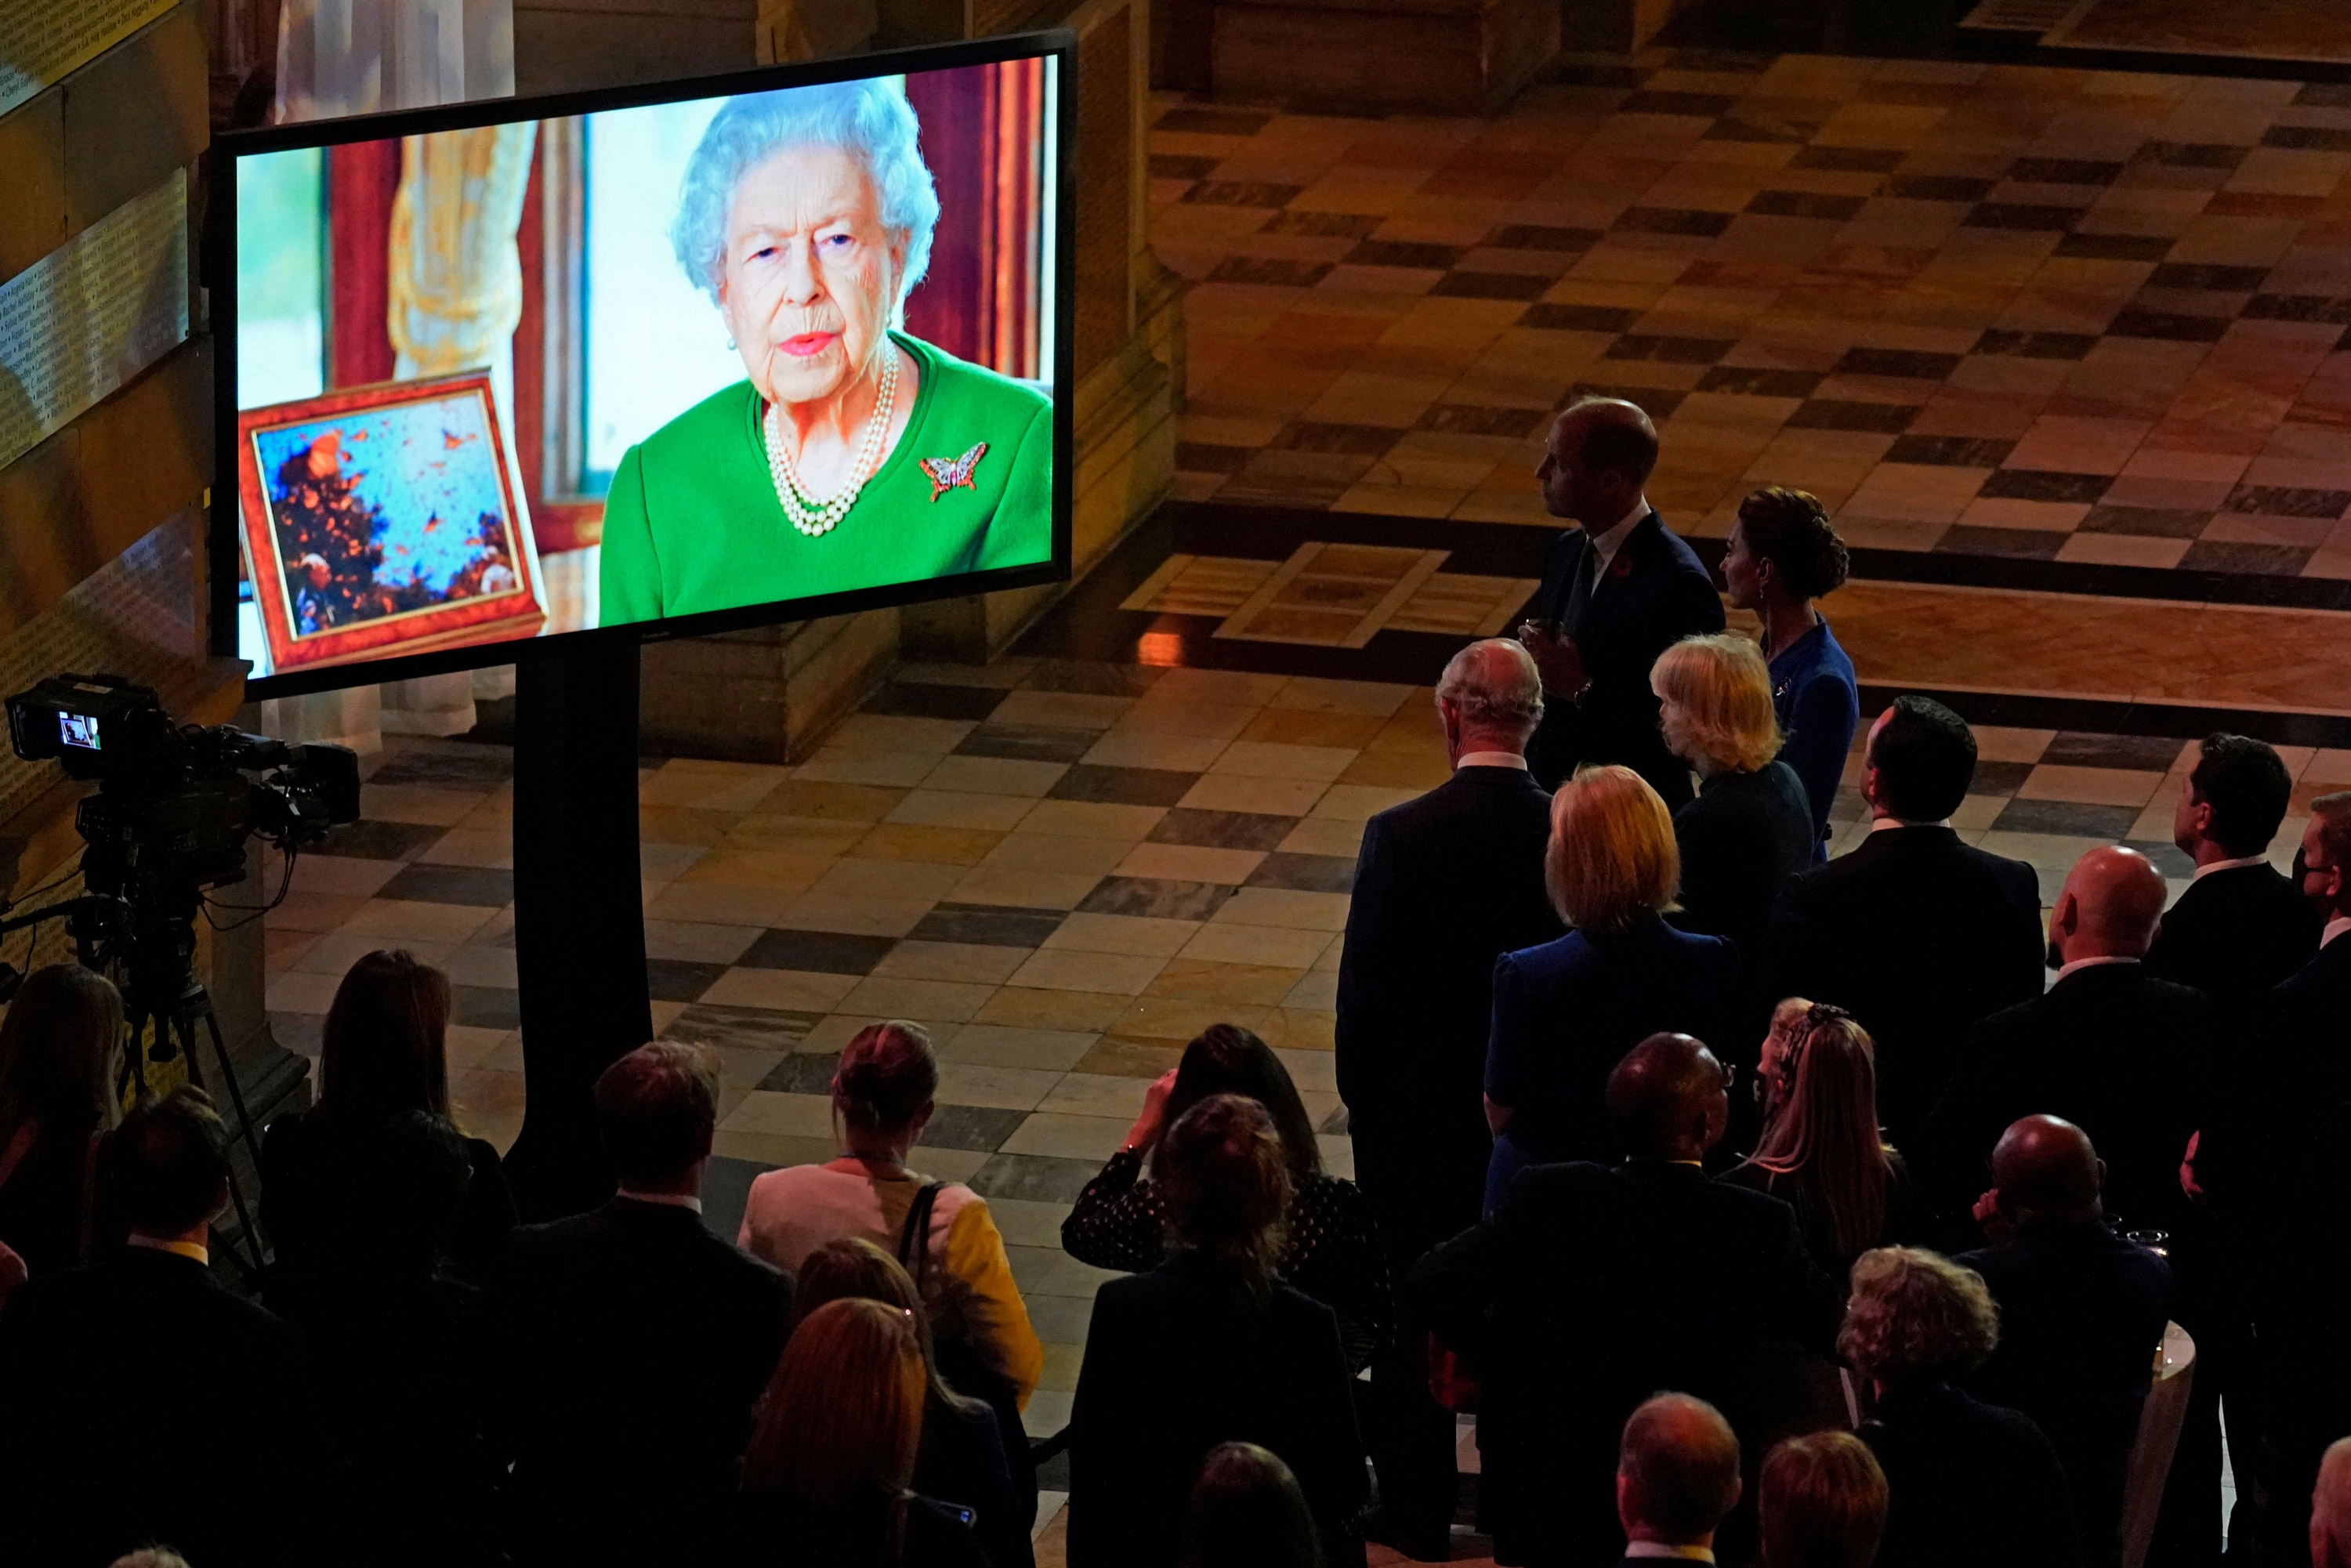 Attendees watch a video message from Britain's Queen Elizabeth II during an evening reception to mark the opening day of COP26 in Glasgow, Scotland, on November 1.